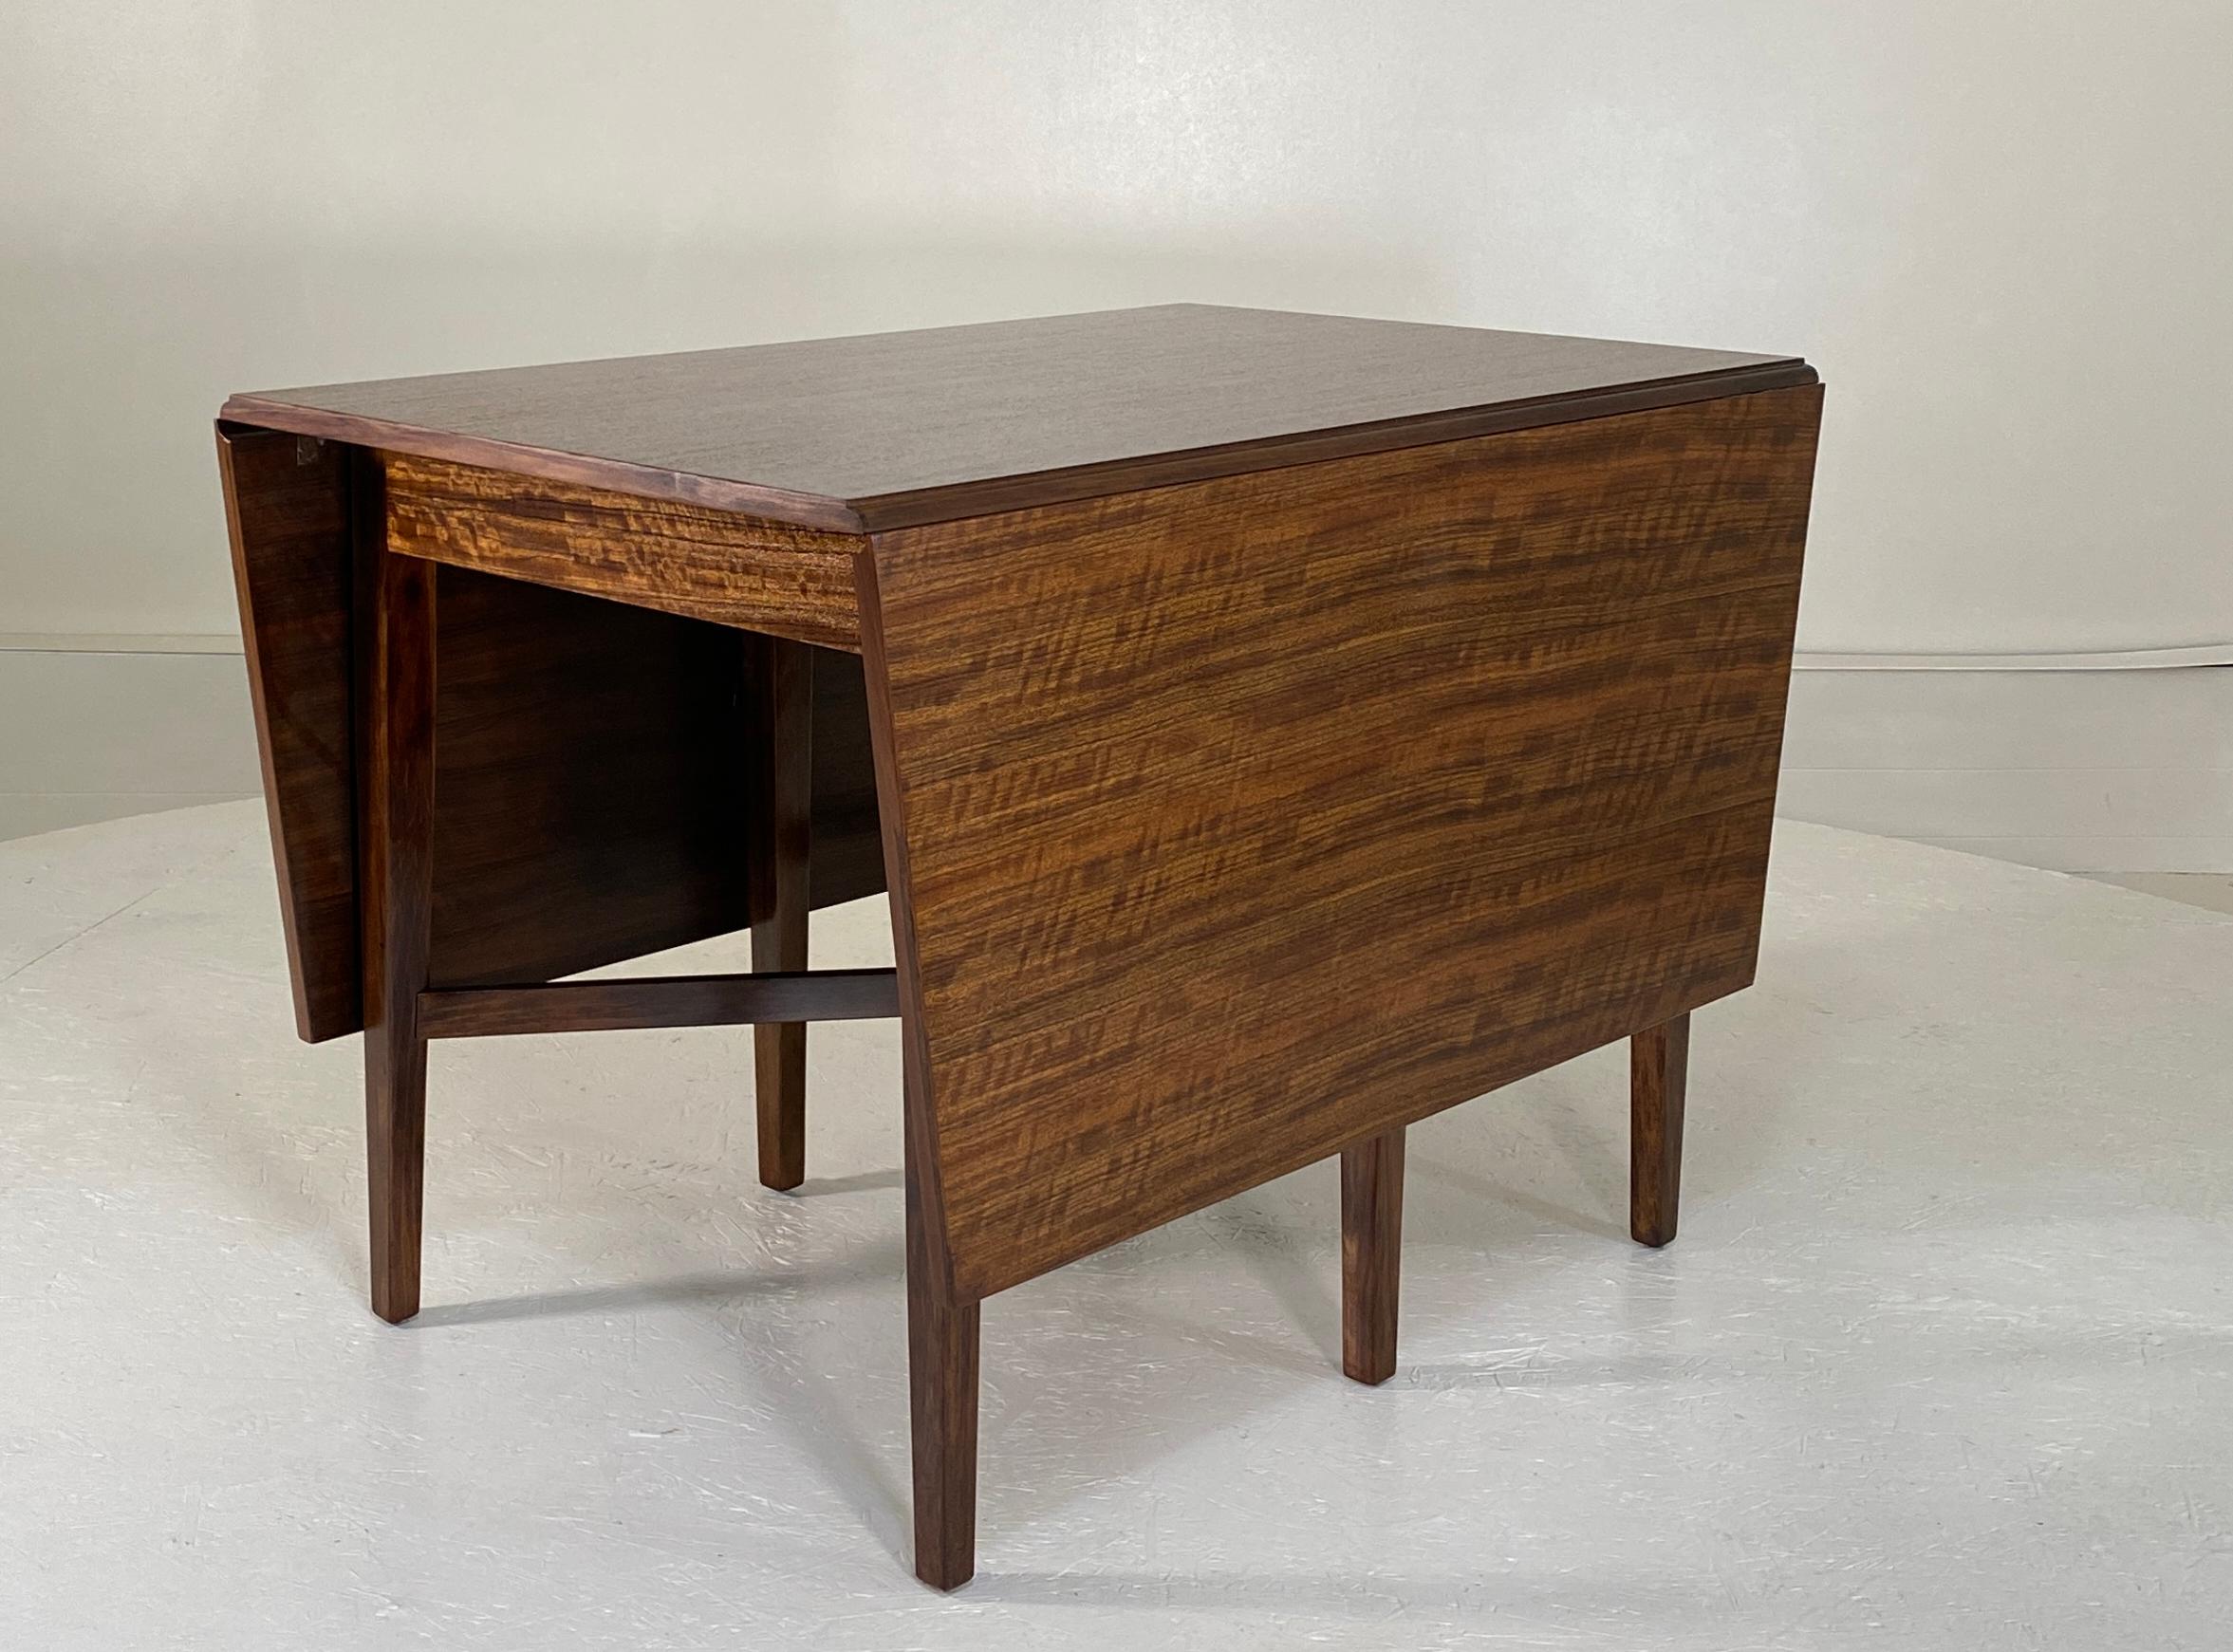 Model 502-4 by Milo Baughman for Drexel Perspective in Mindoro Wood 1952. 66